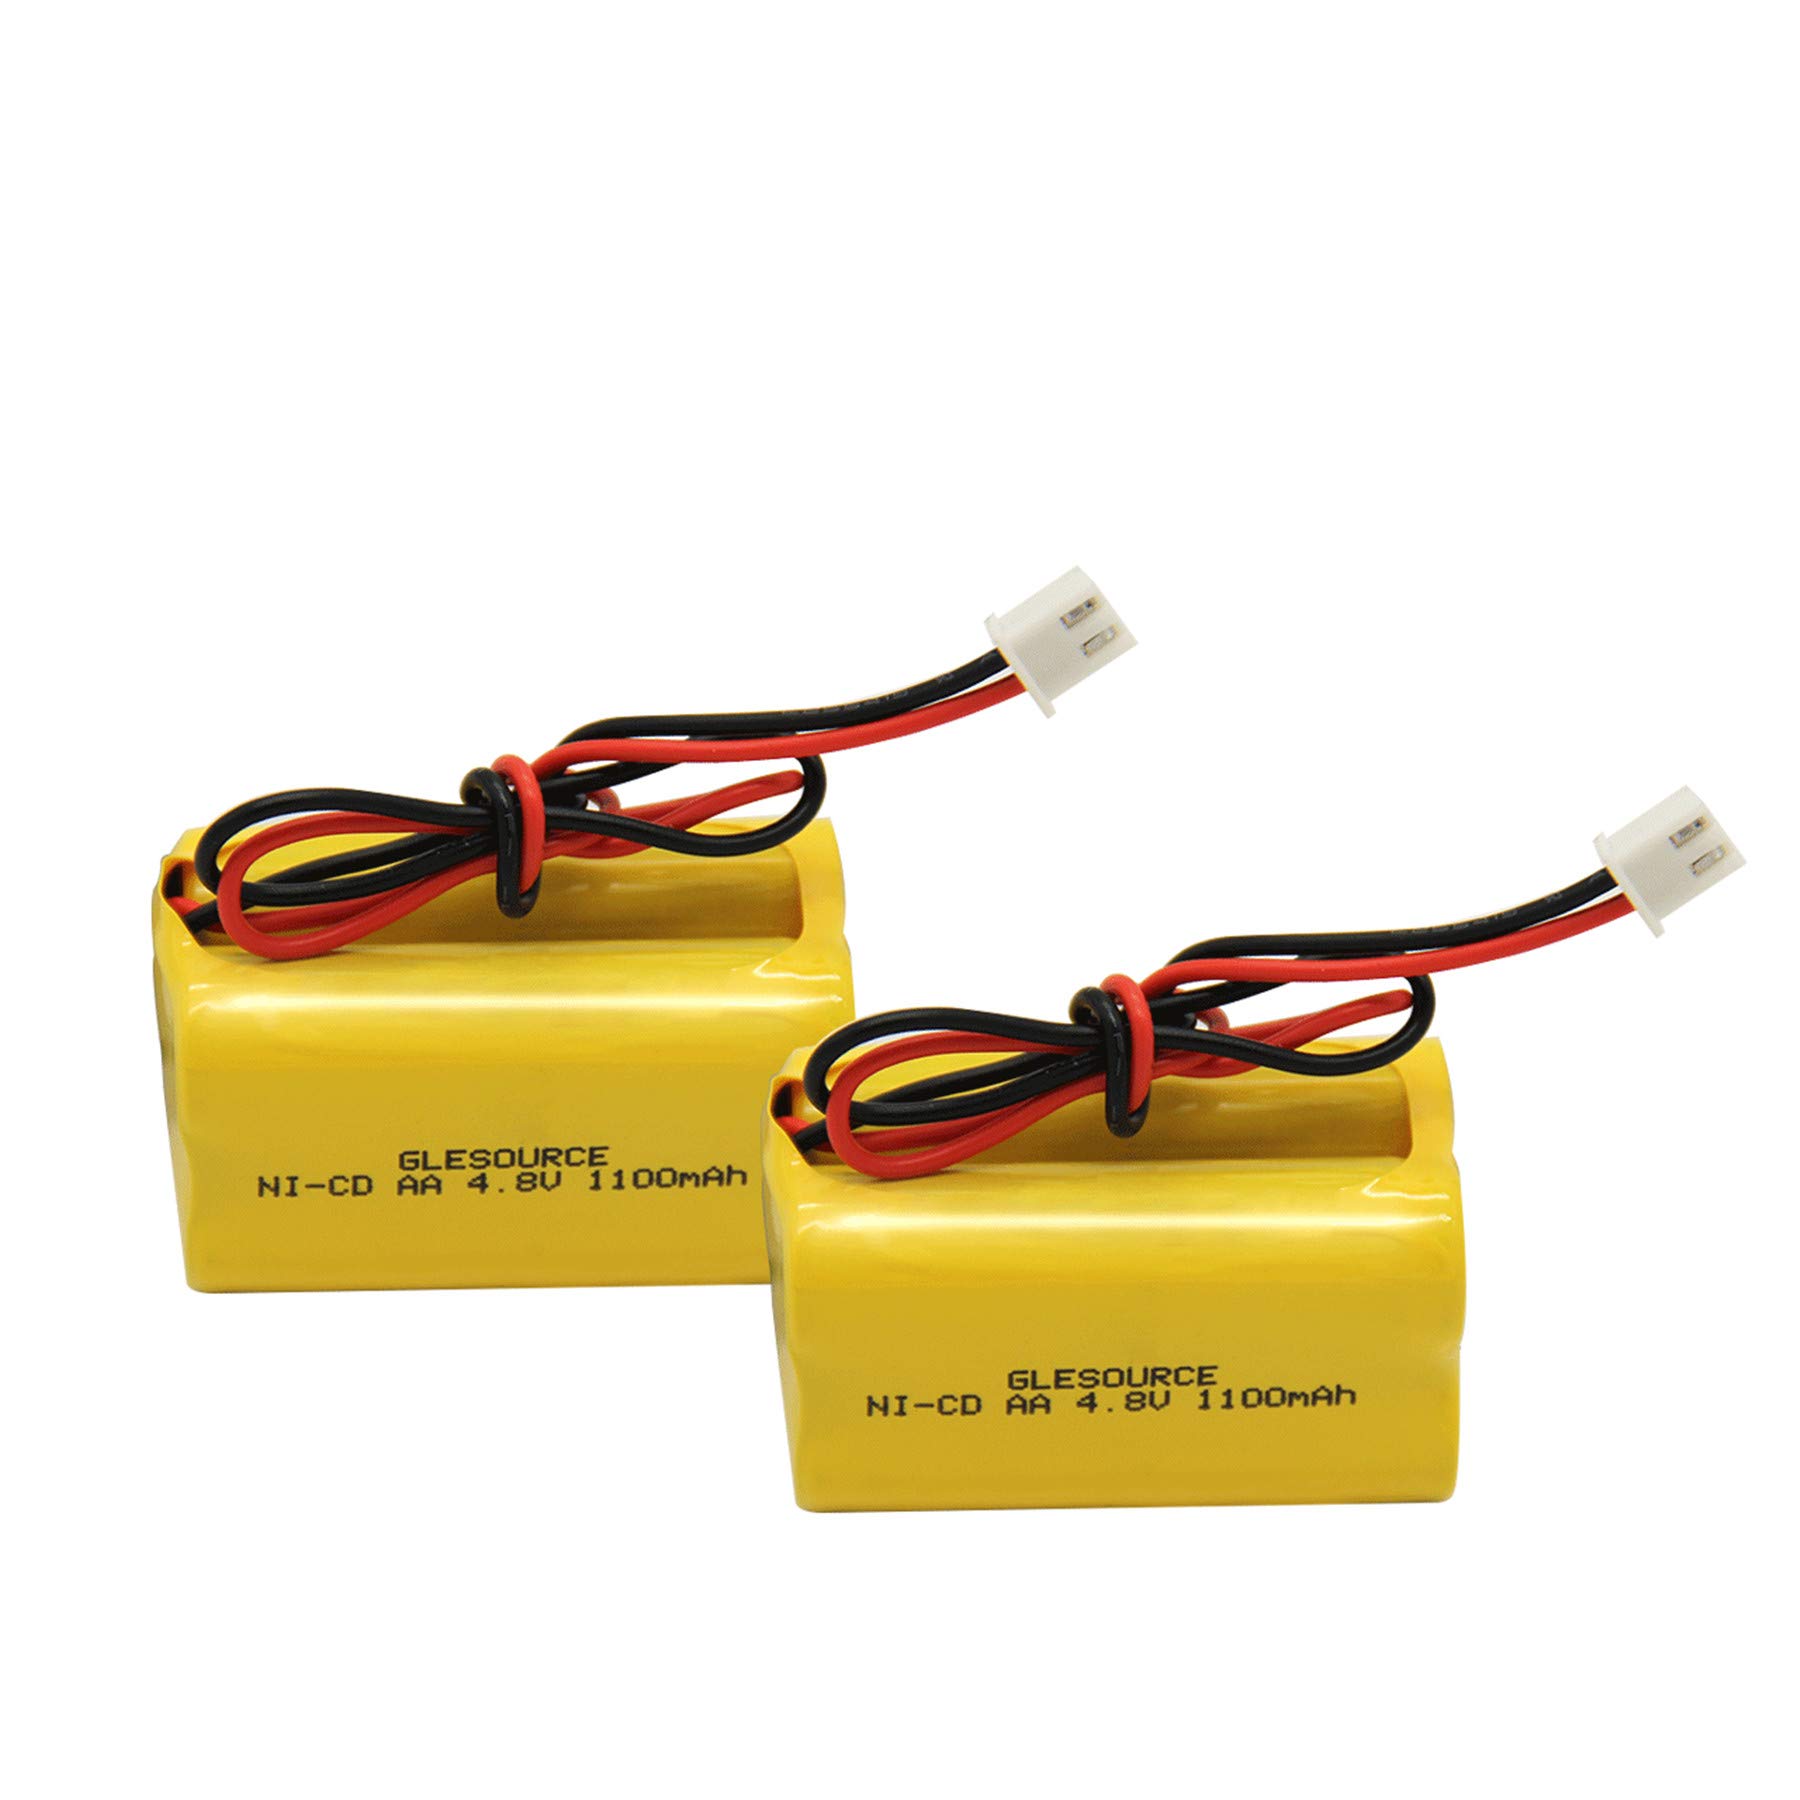 Nickel cadmium (NiCd) batteries are direct replacements for NiCd batteries in specific emergency lights and exit signs. The terminal placement and overall dimensions of a NiCd battery must match the location of mating connectors and the installation space